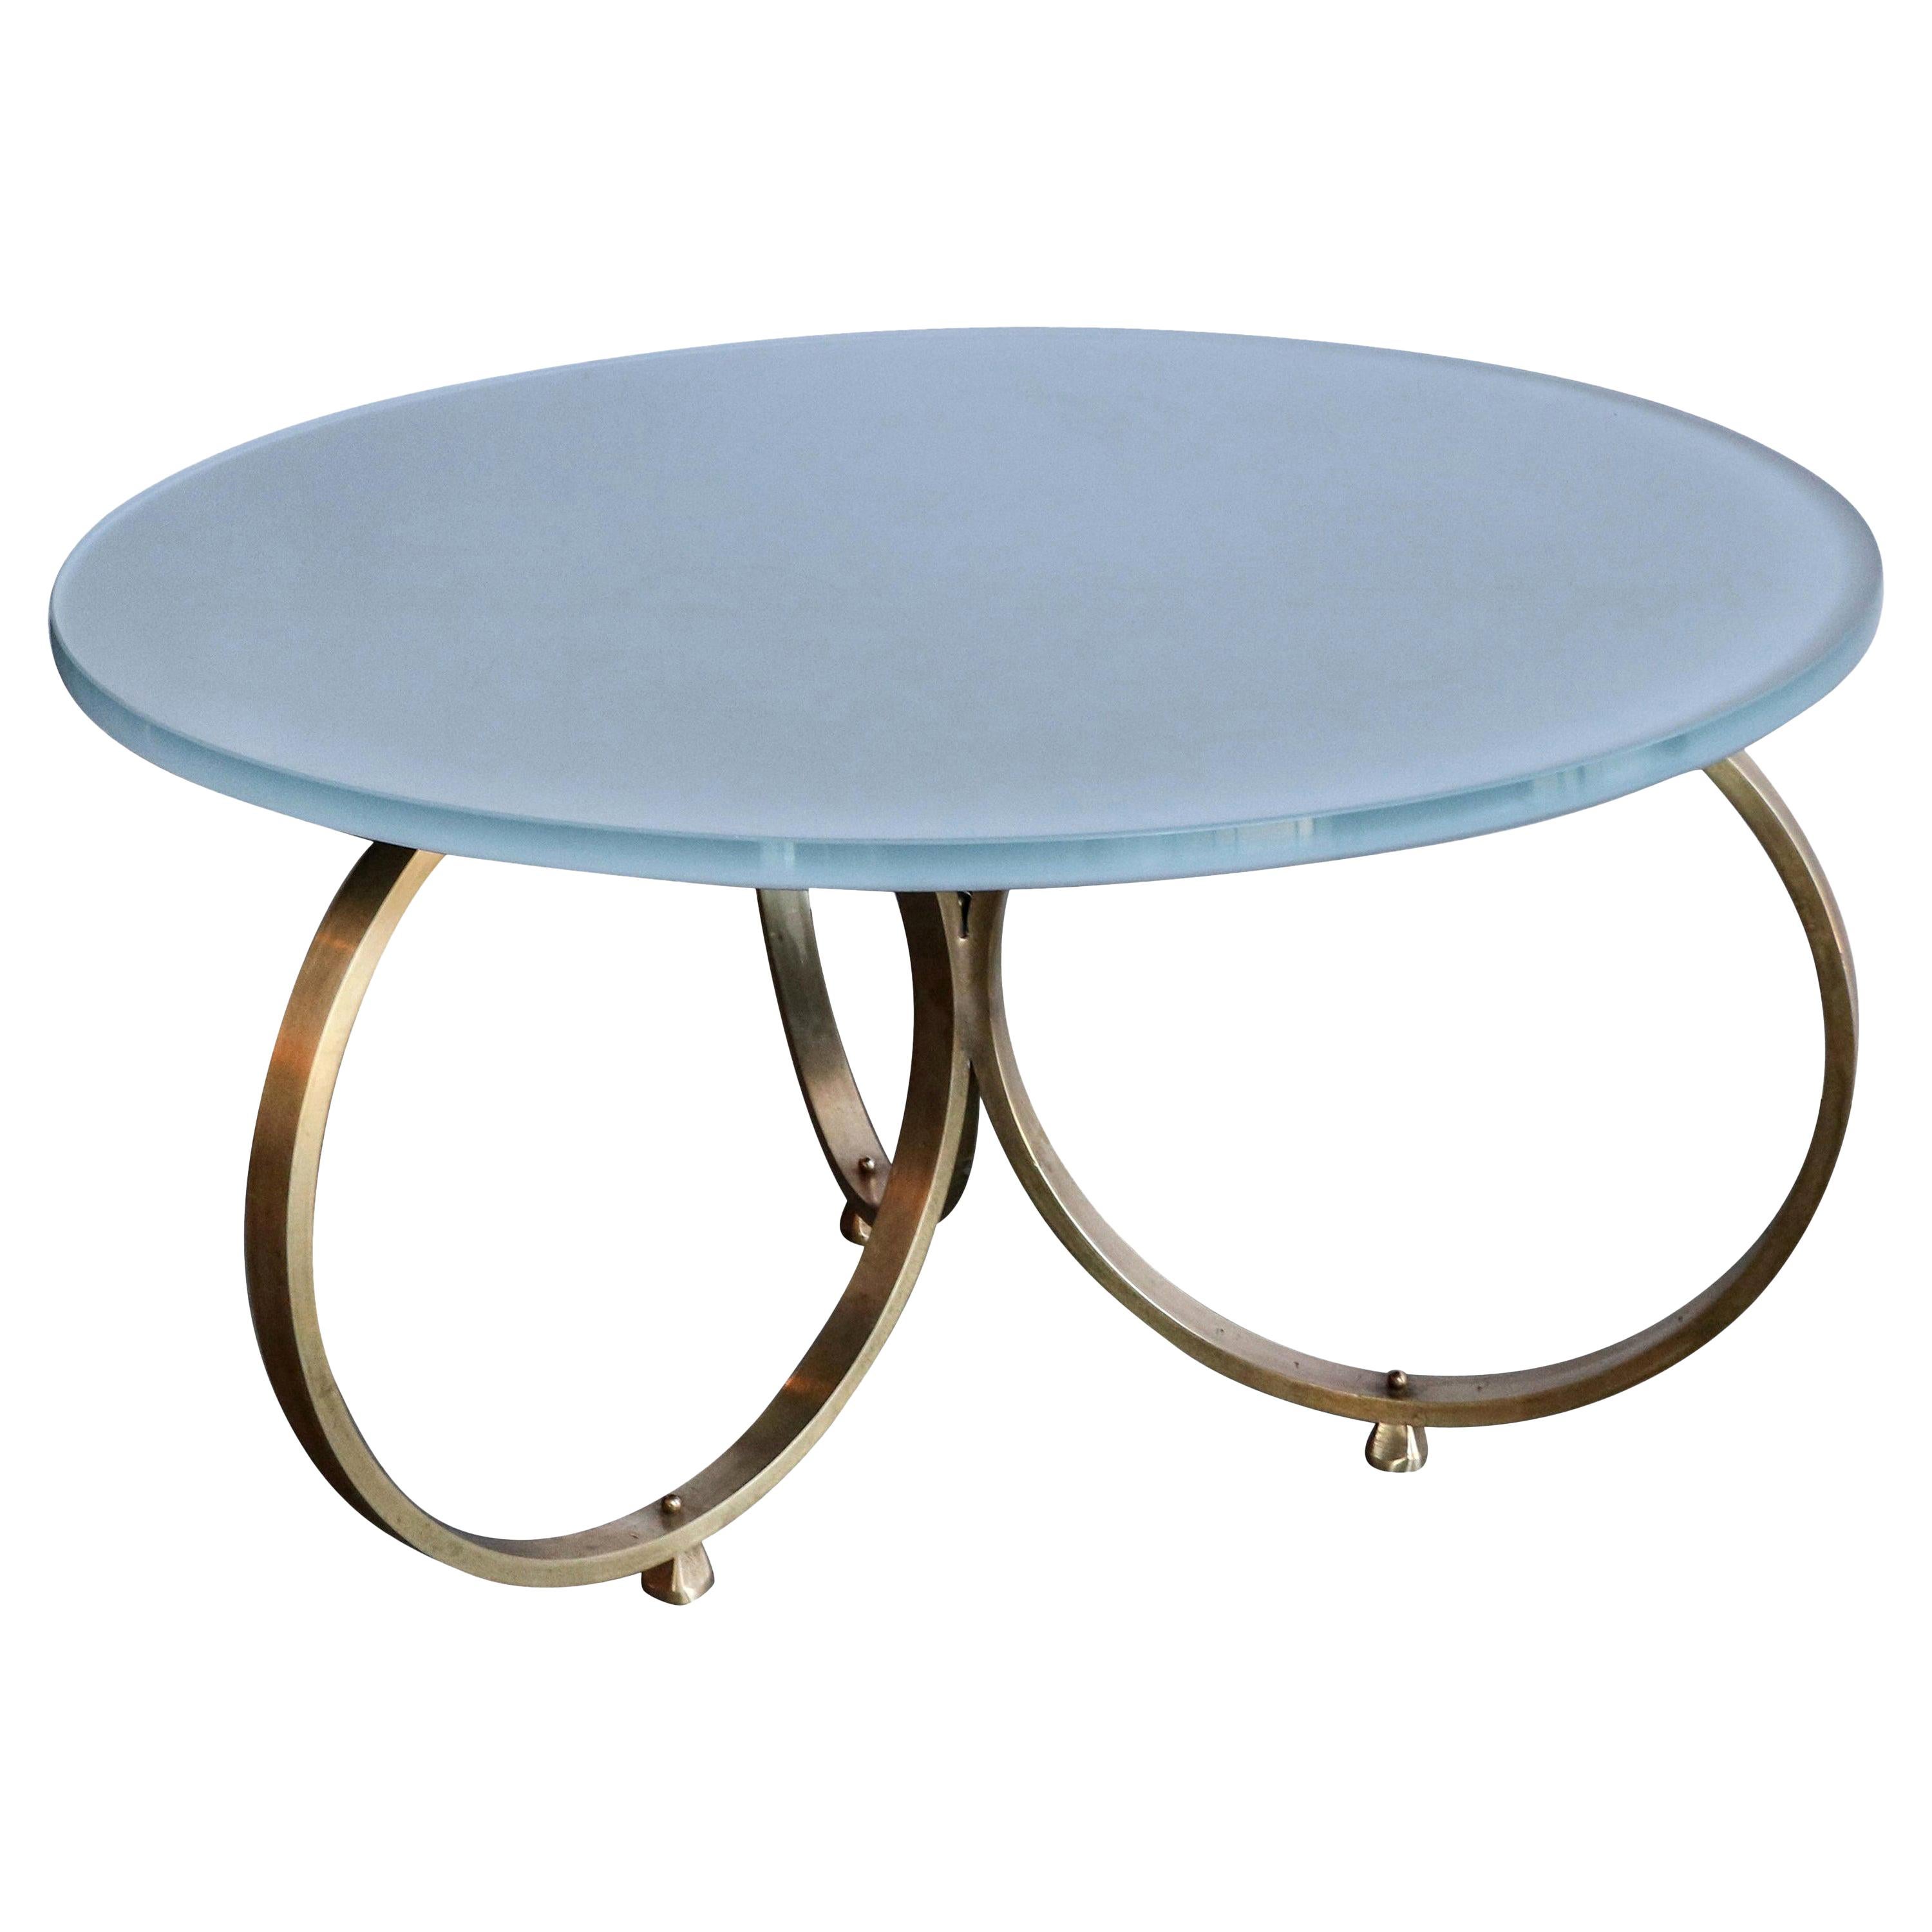 Custom brass coffee table with reverse painted grey blue glass top.  Handmade in Los Angeles by Adesso Imports. Can be done in many colors and finishes.